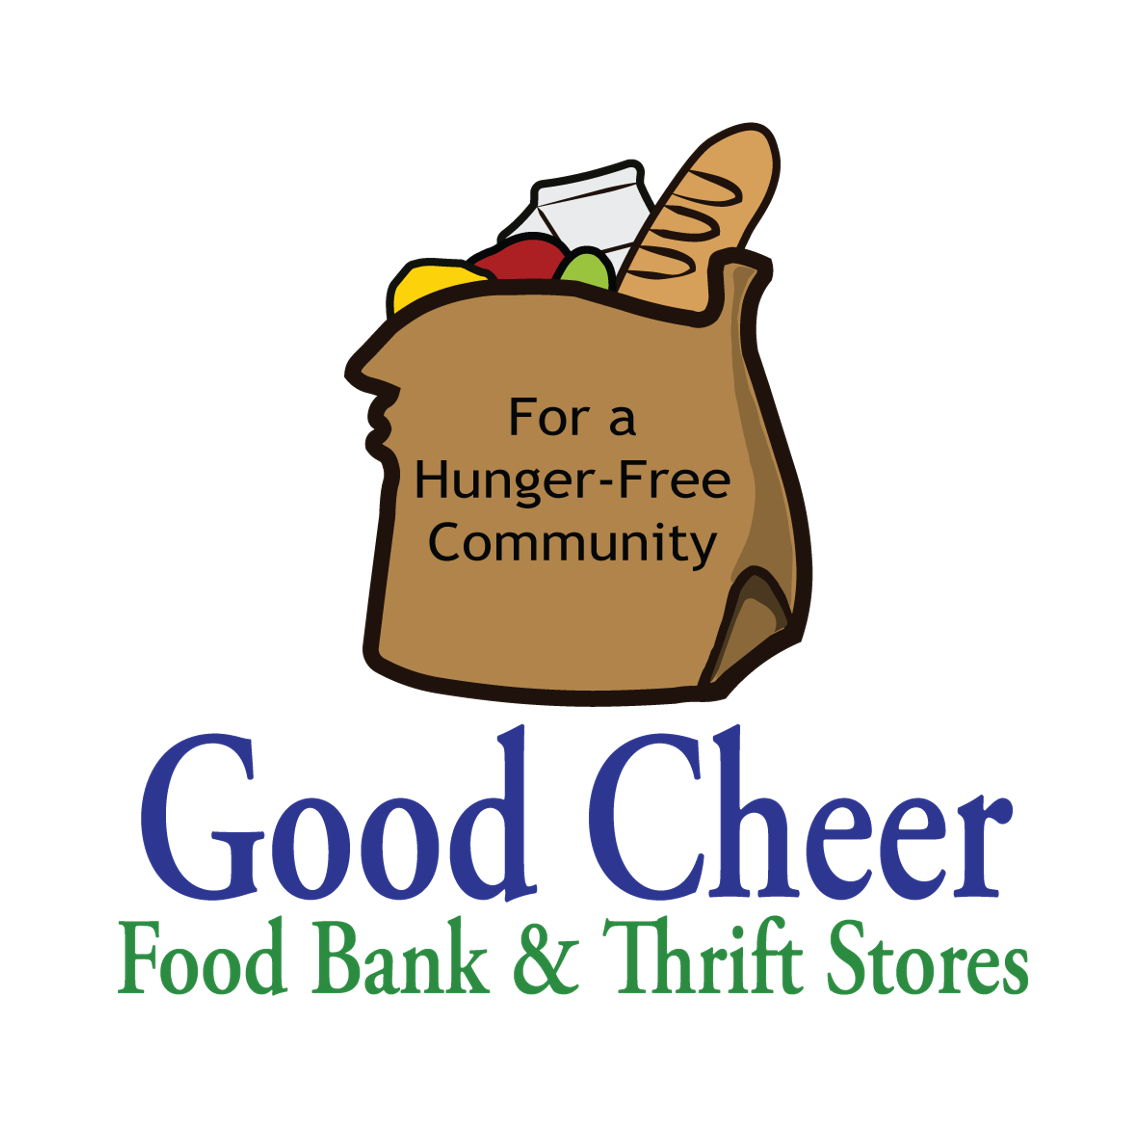 Good Cheer Food Bank and Thrift Stores